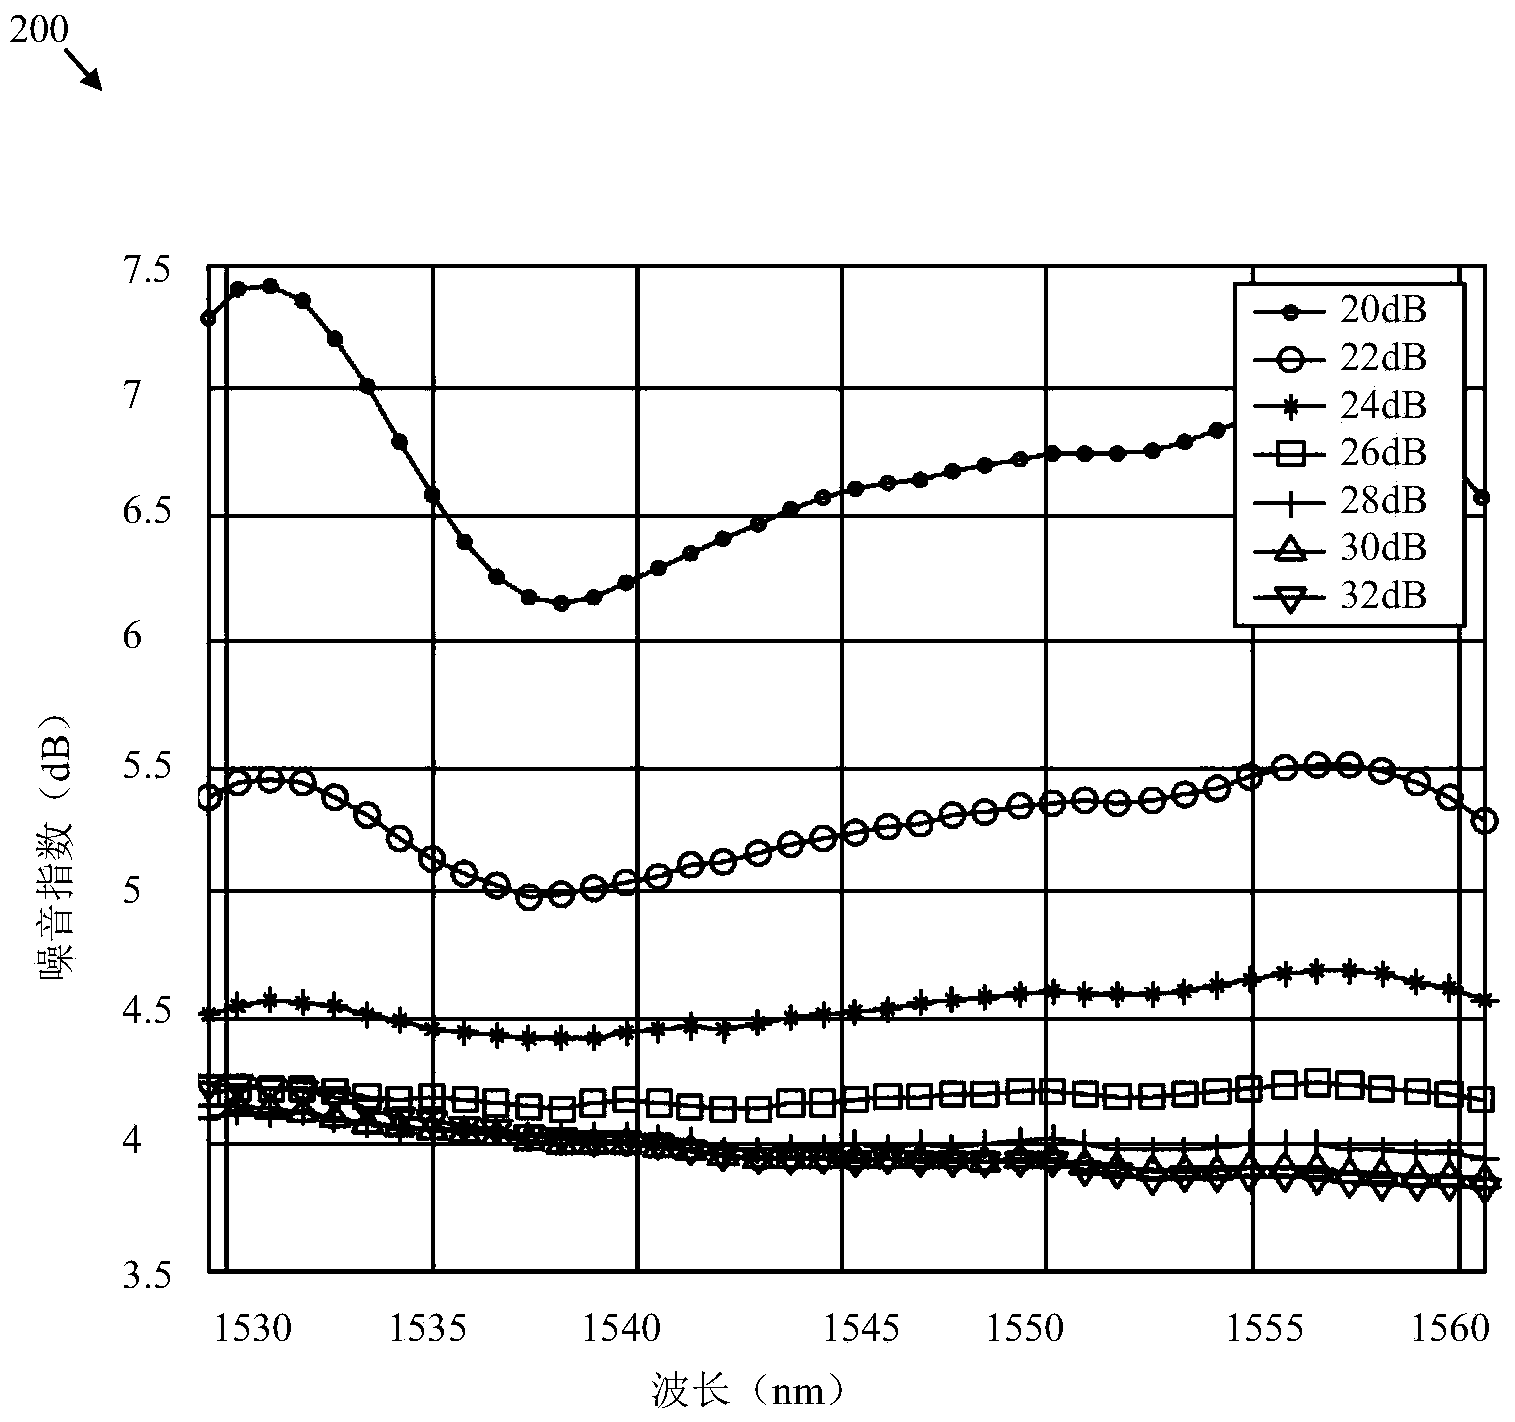 An apparatus and method to calculate a noise figure of an optical amplifier for wavelength channels in a partial-fill scenario to account for channel loading